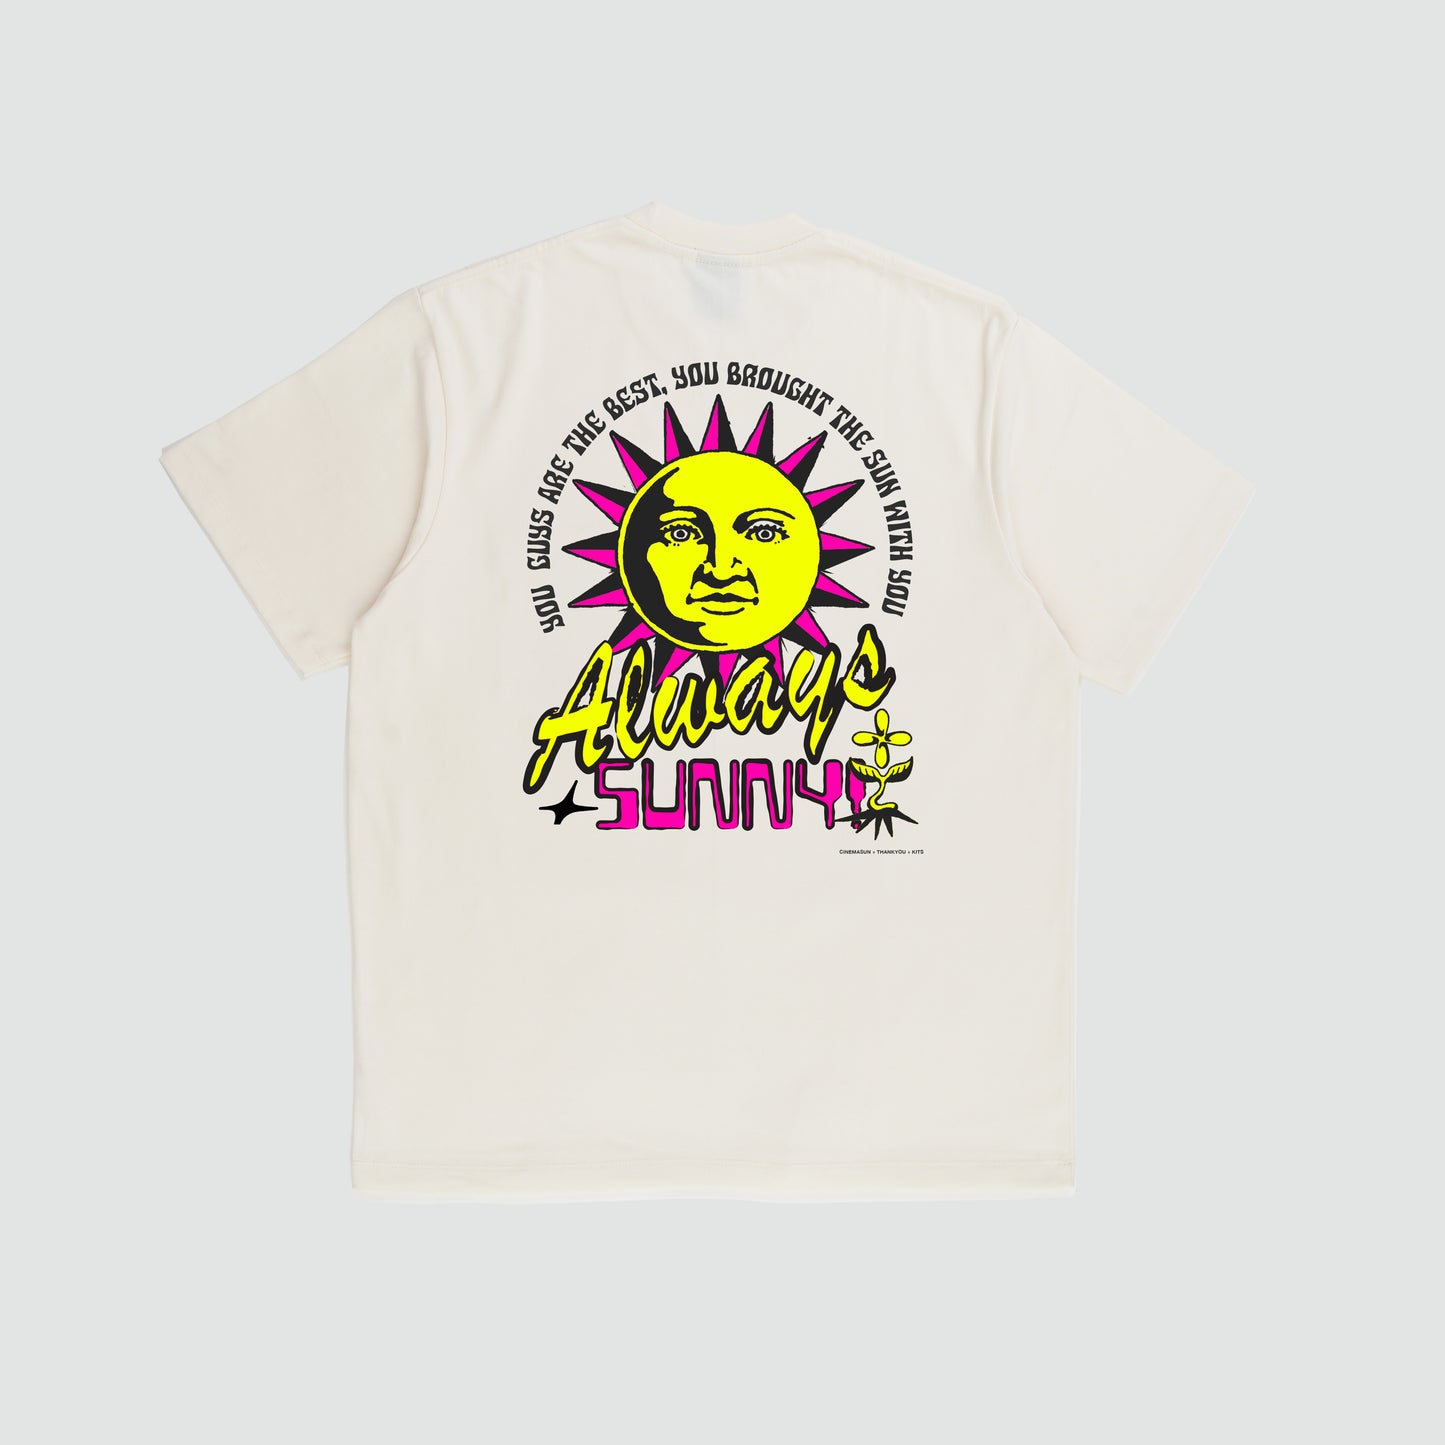 S/S Afterglow Sun Strong Graphic Tee